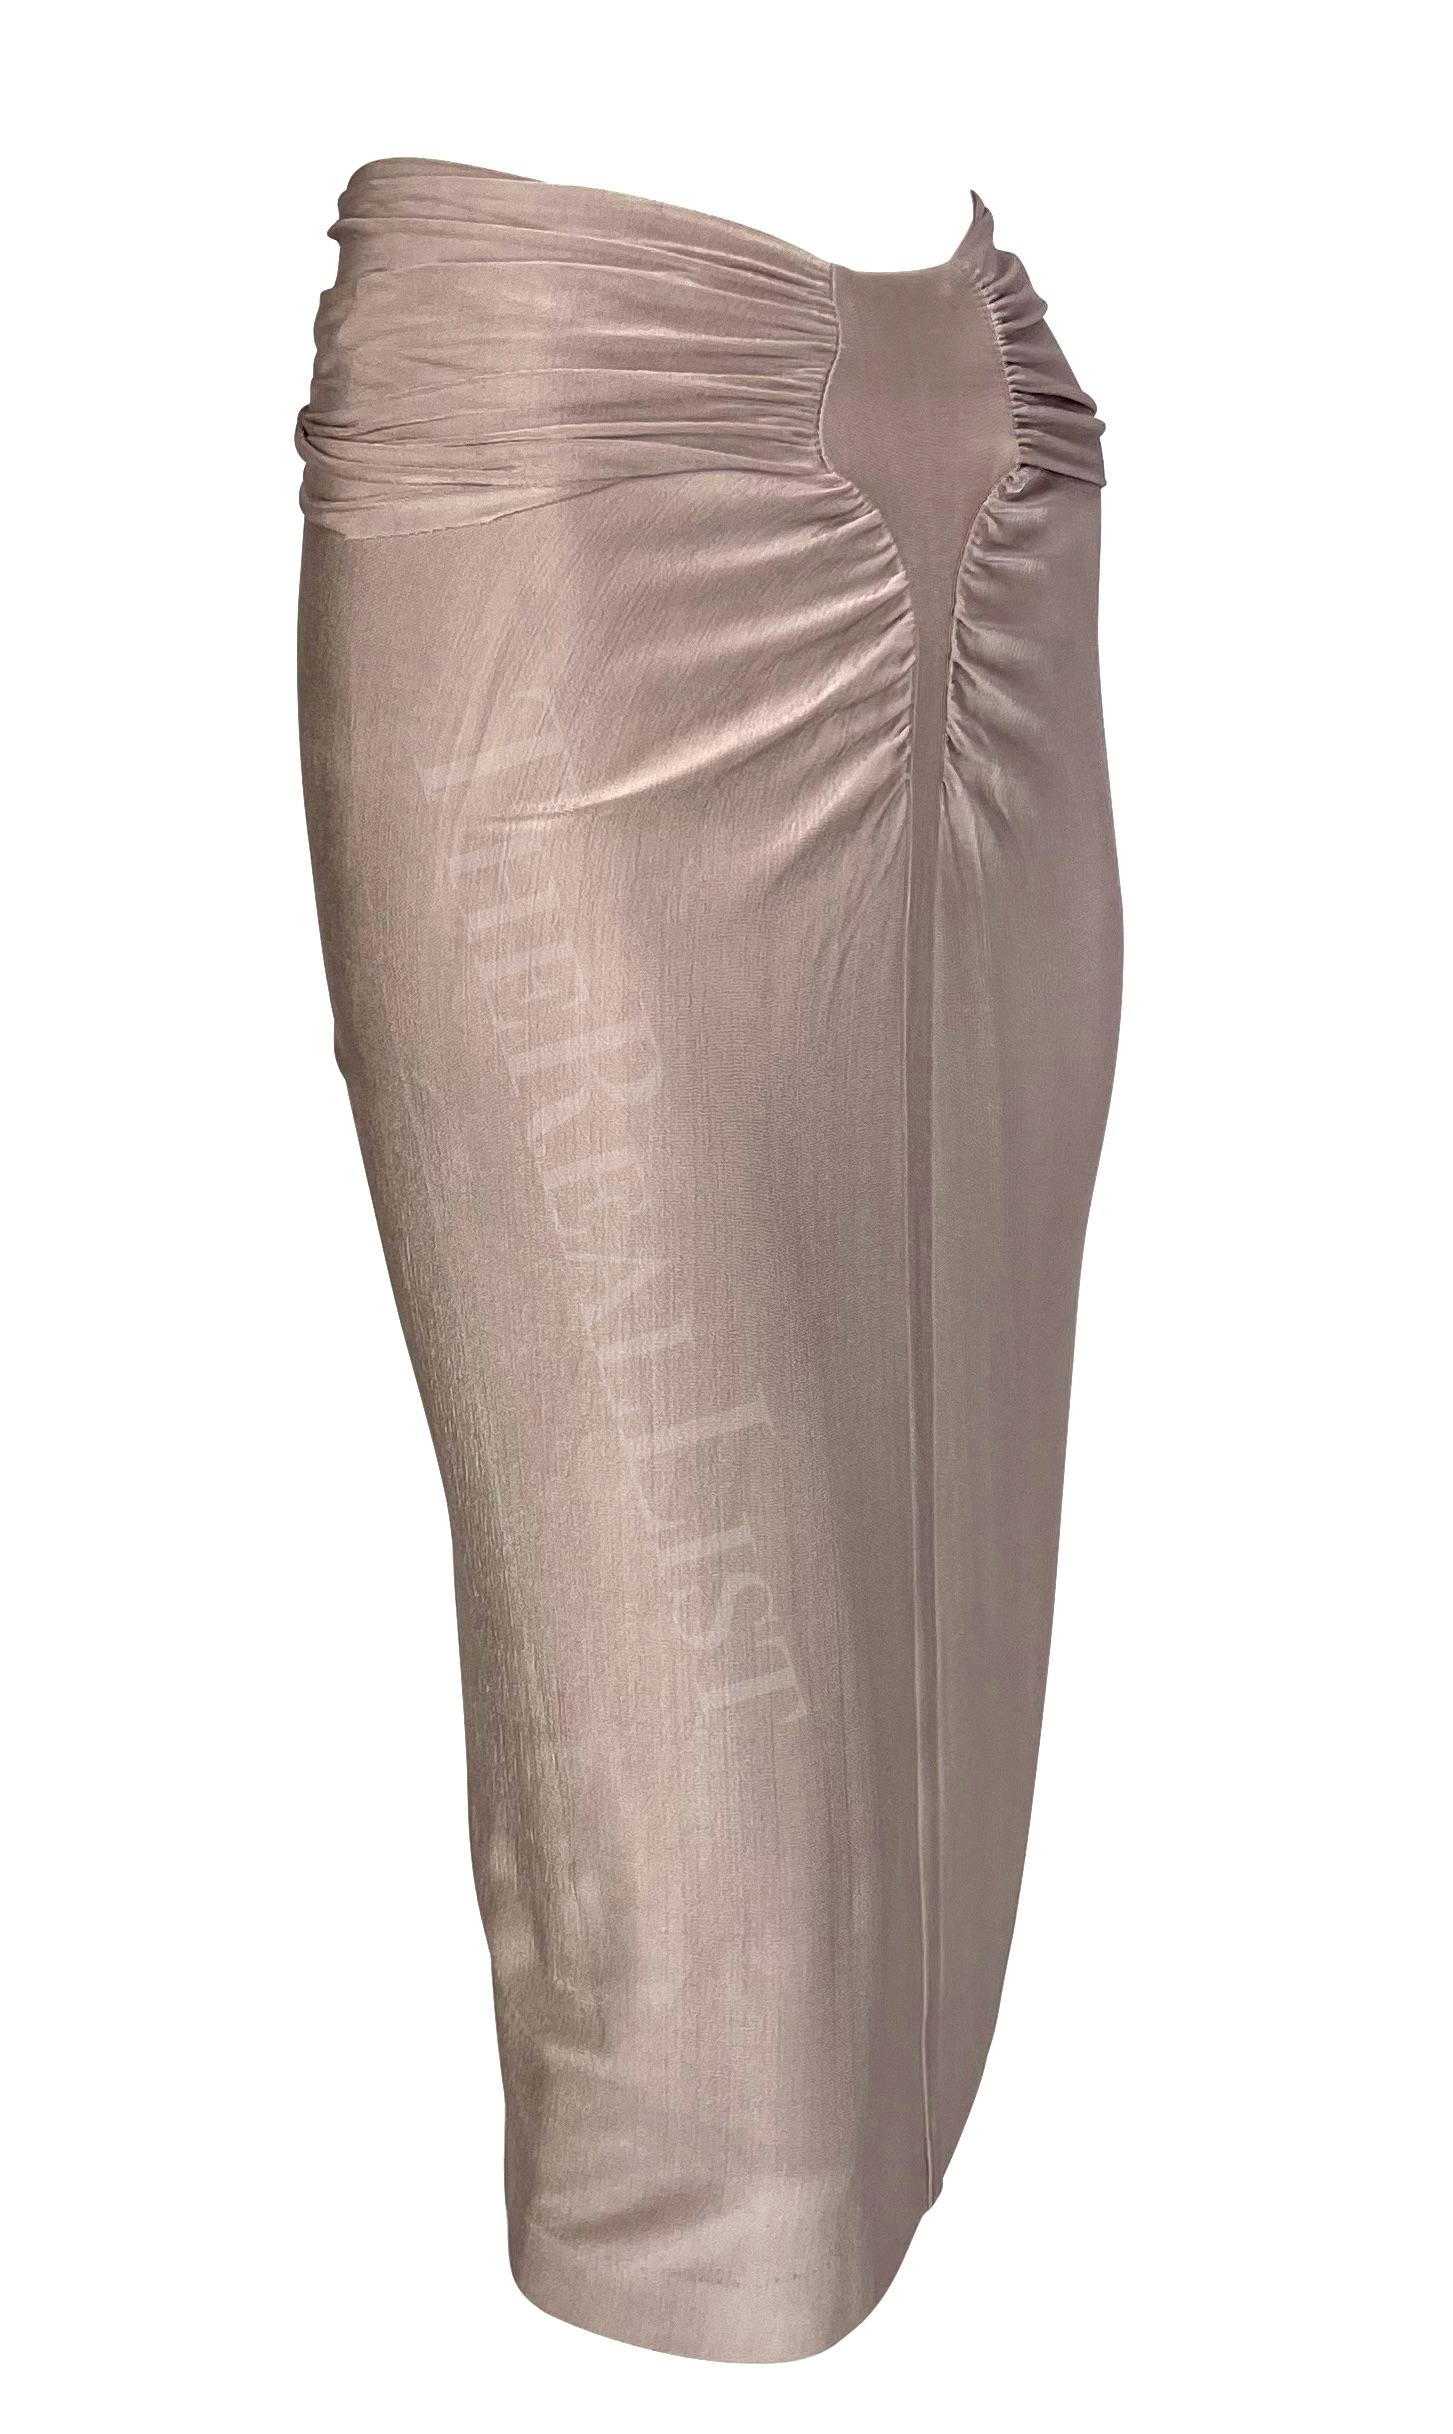 S/S 2003 Yves Saint Laurent by Tom Ford Runway Dusty Lavender Ruched Slinky 4